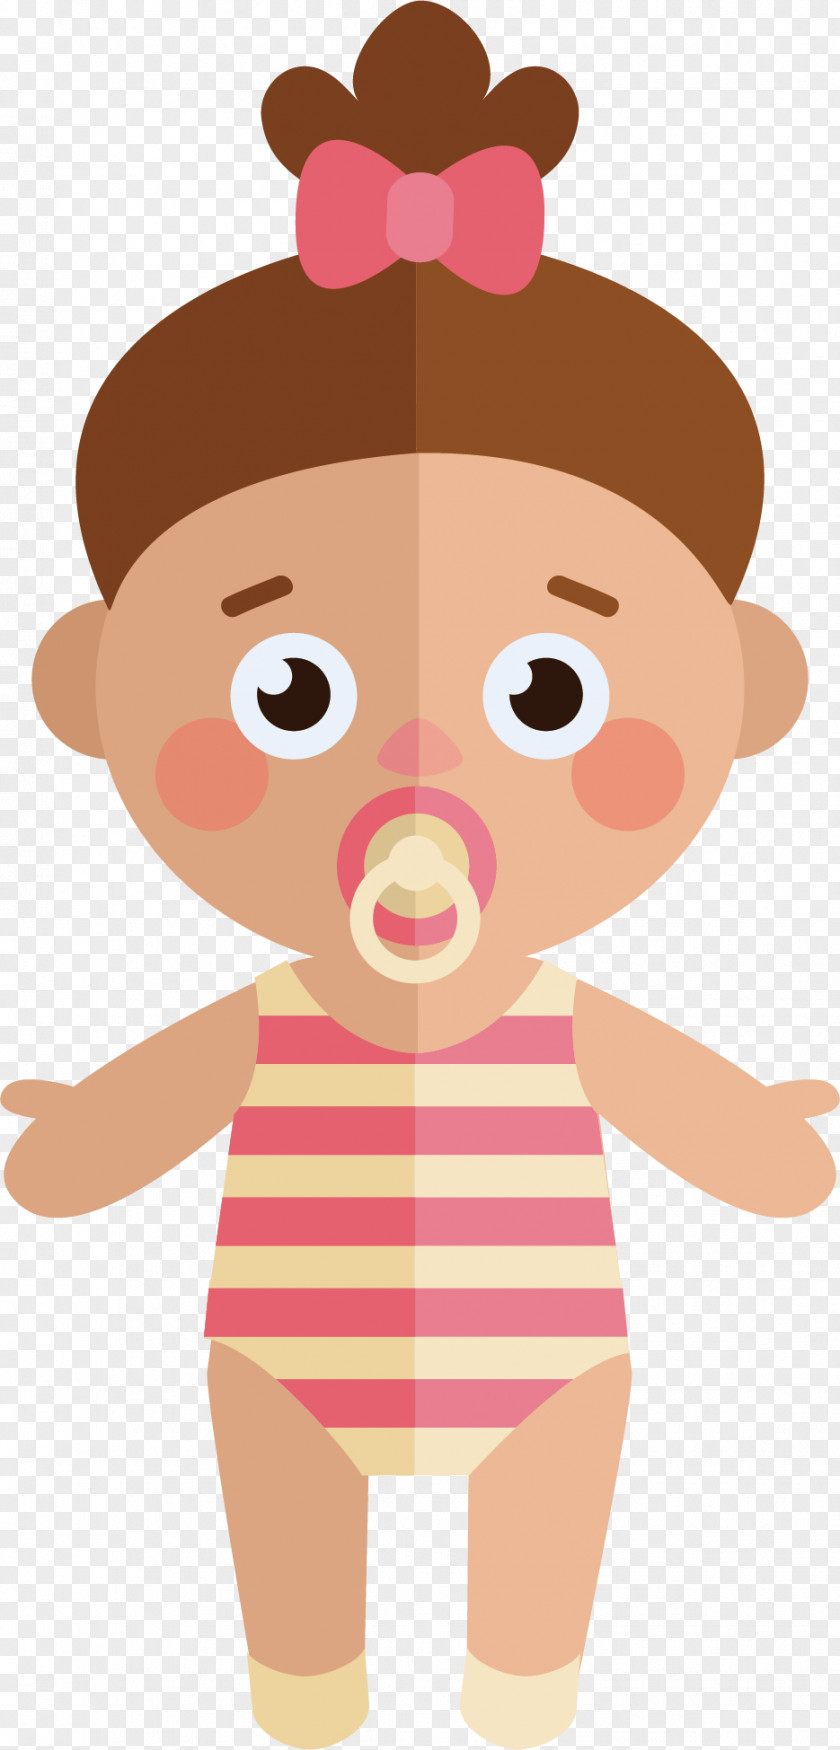 Cute Baby Vector Diaper Childhood PNG